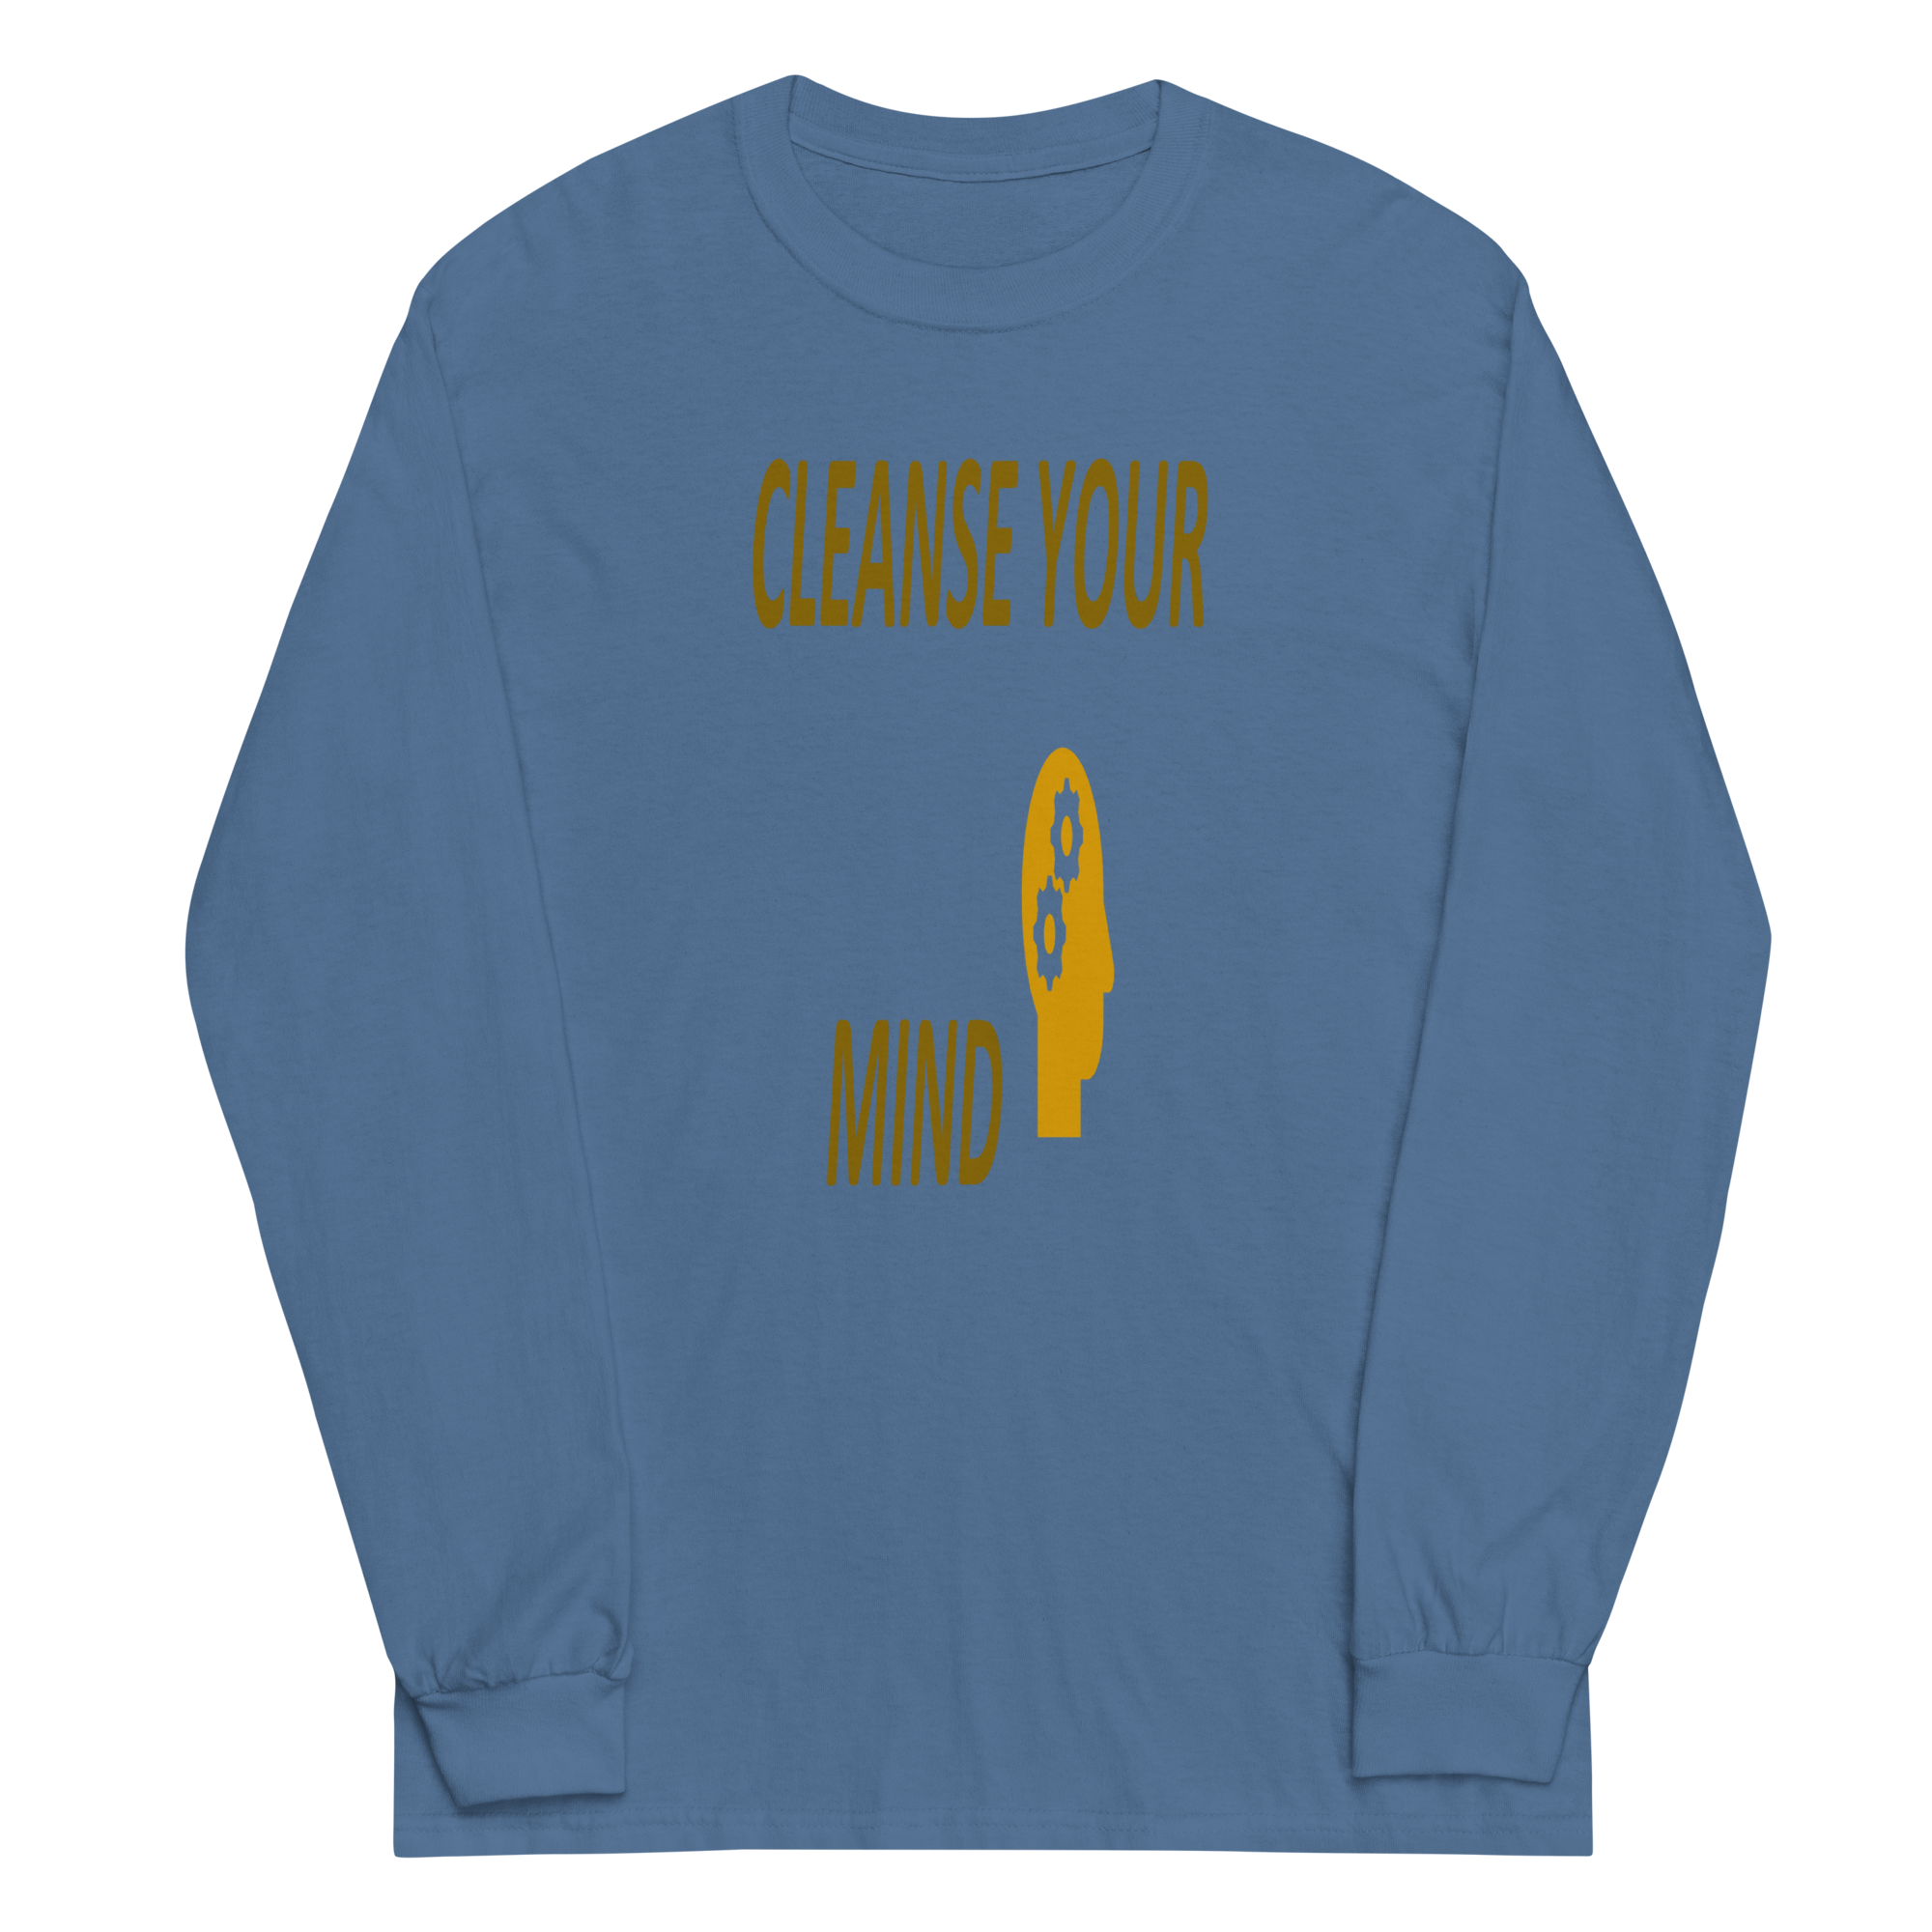 CLEANSE YOUR MIND Long Sleeve Shirt